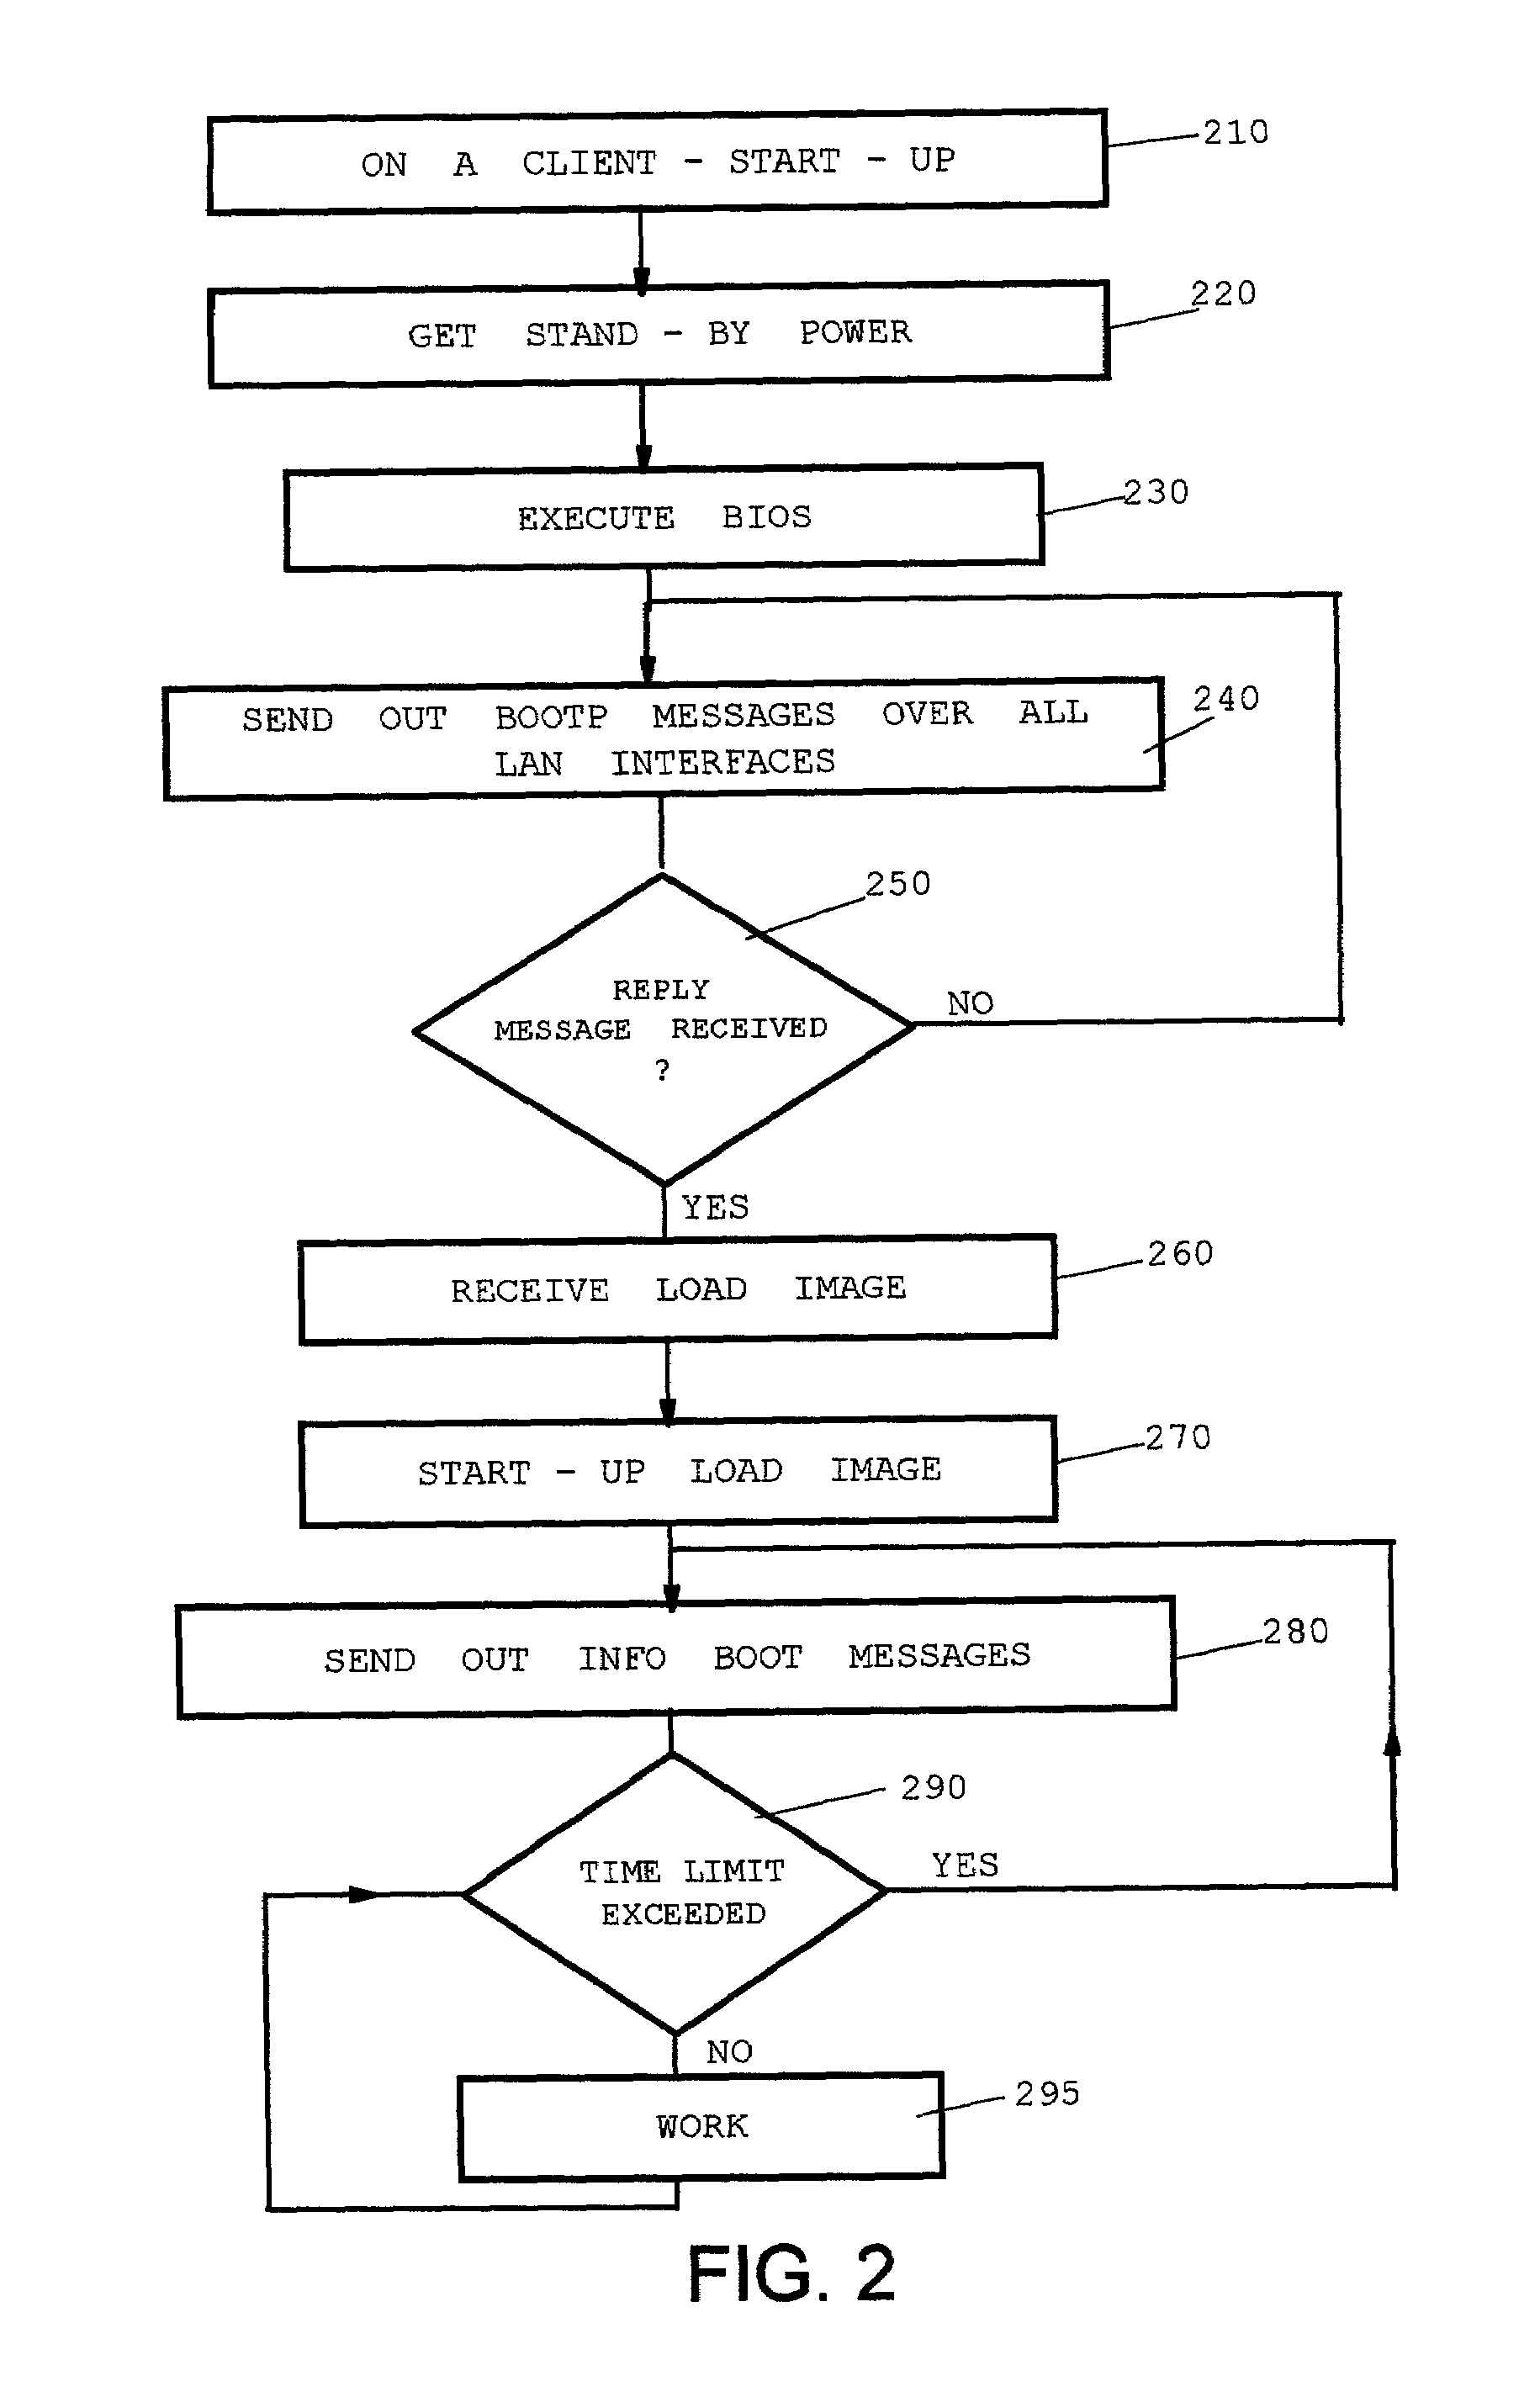 Extension of the BOOTP protocol towards automatic reconfiguration